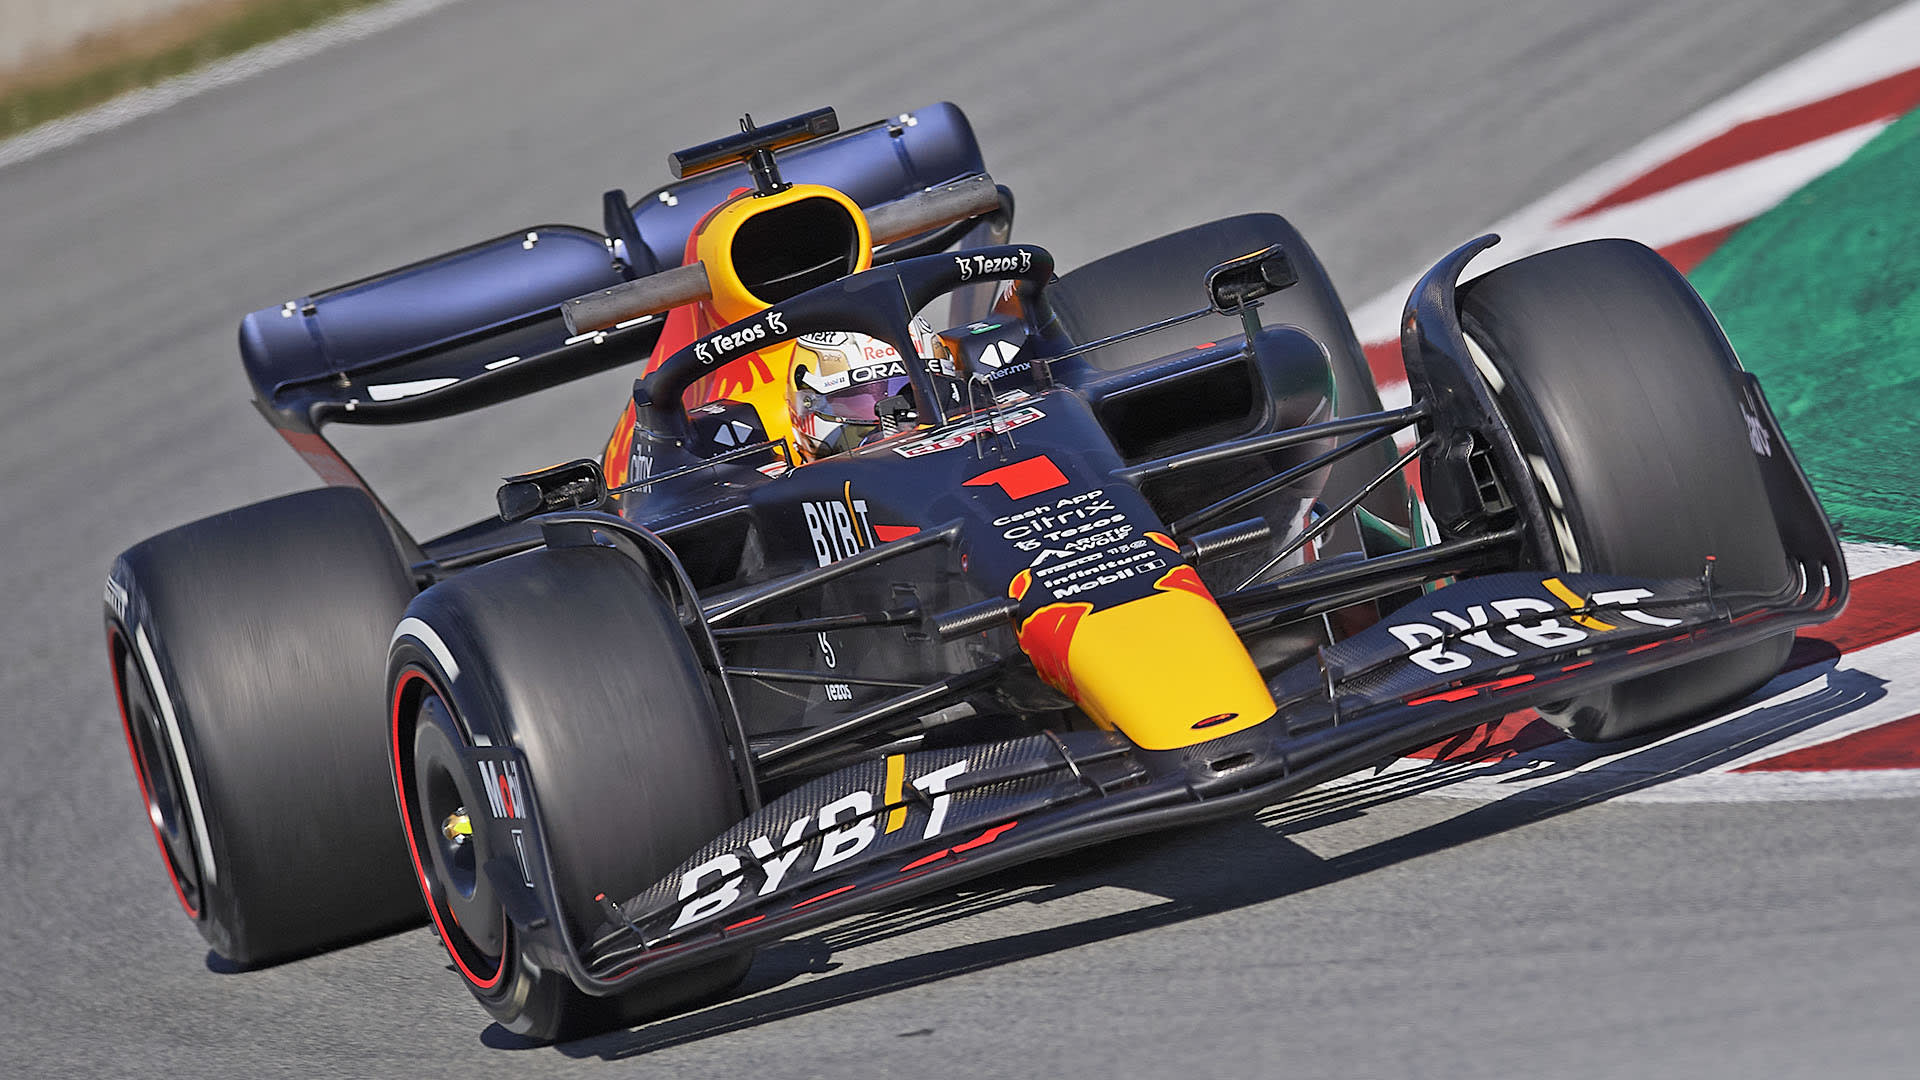 ANALYSIS The fascinating features on show as Red Bulls proper RB18 is unleashed at Barcelona Formula 1®